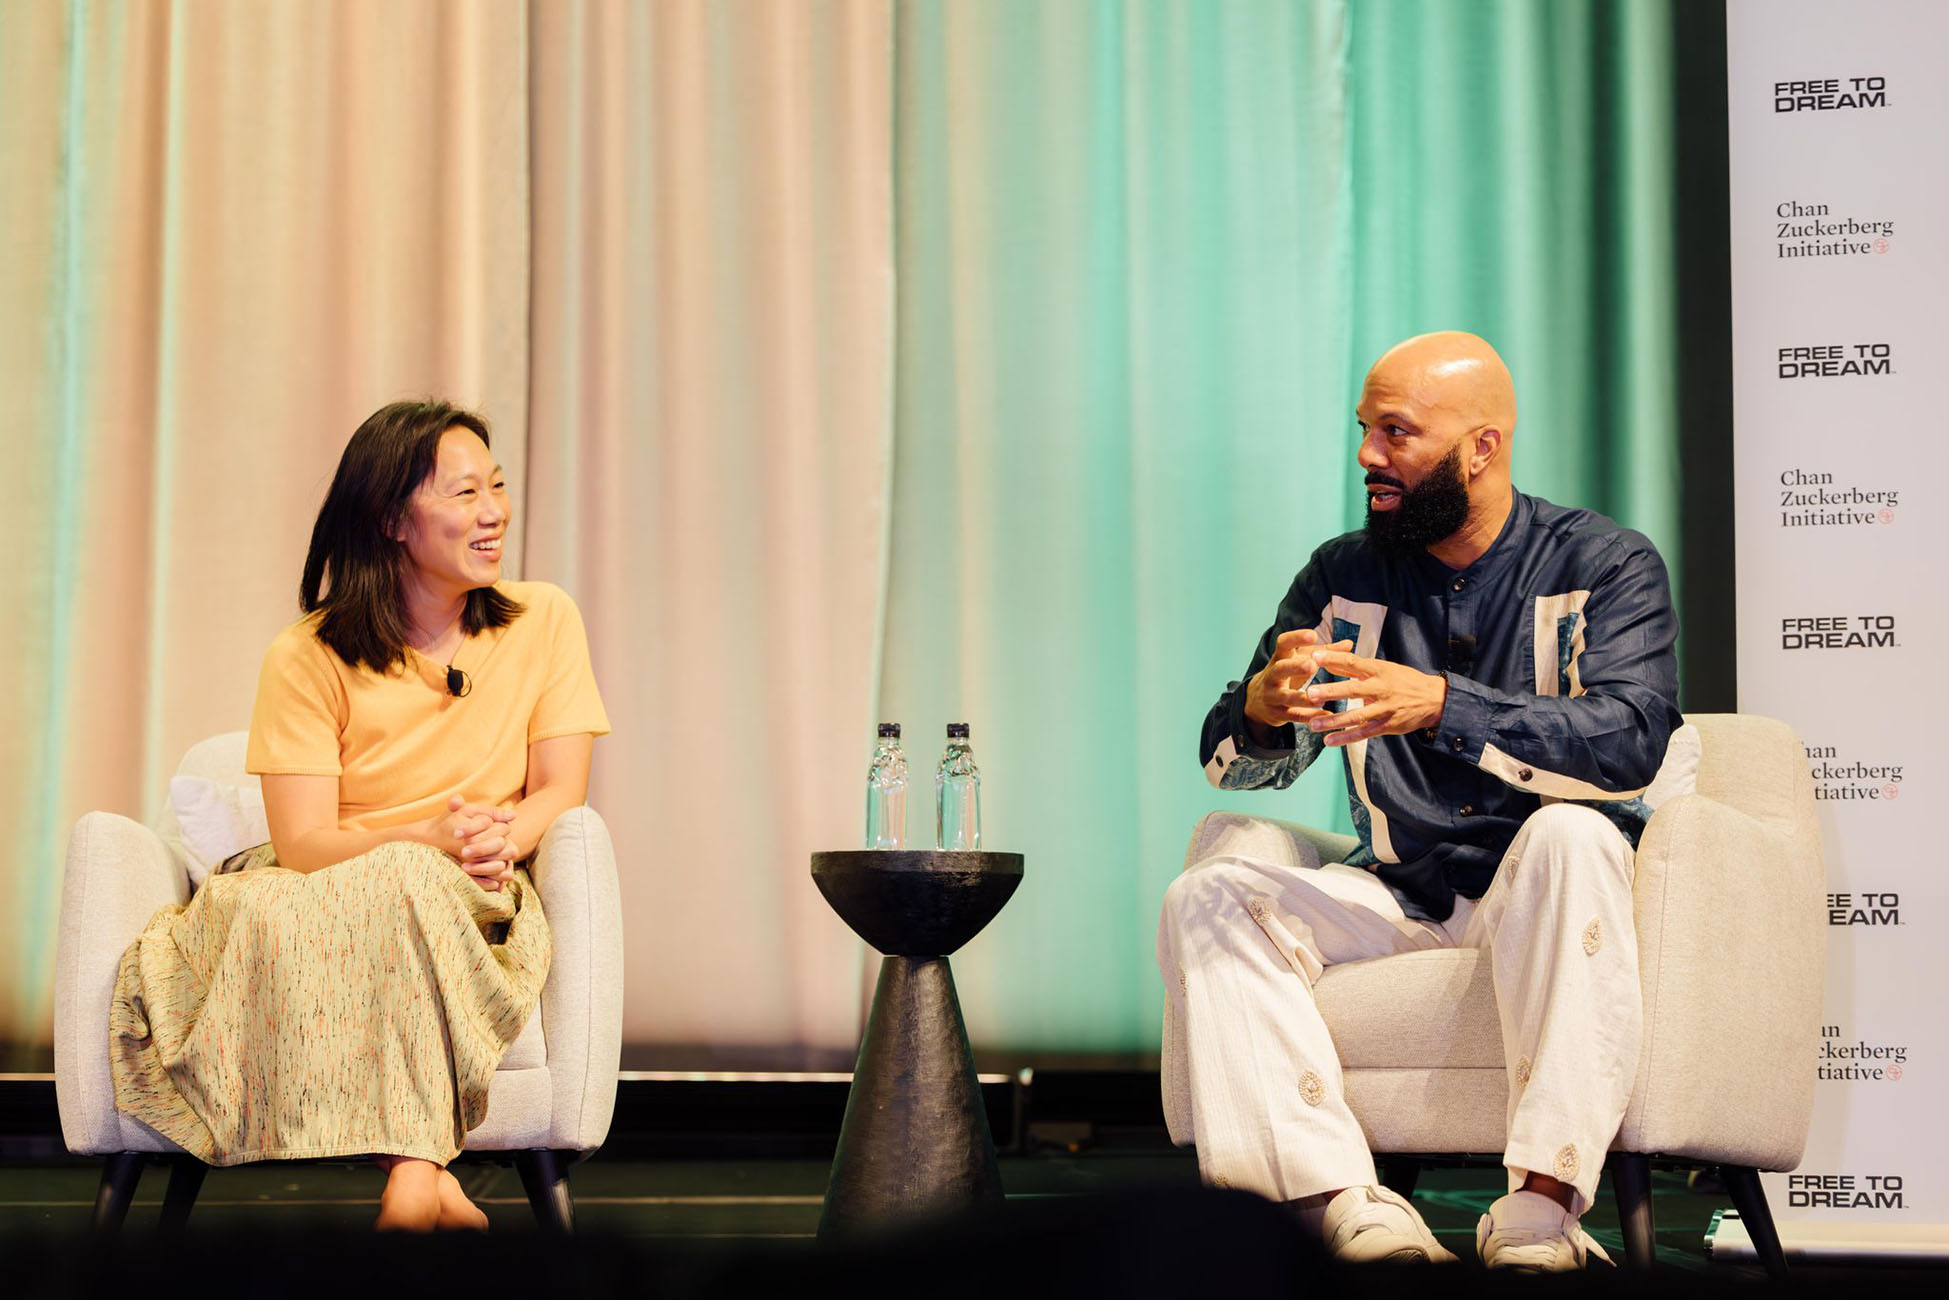 Priscilla Chan and Common in conversation about the importance of partnering with teachers to unlock the full potential of every student.